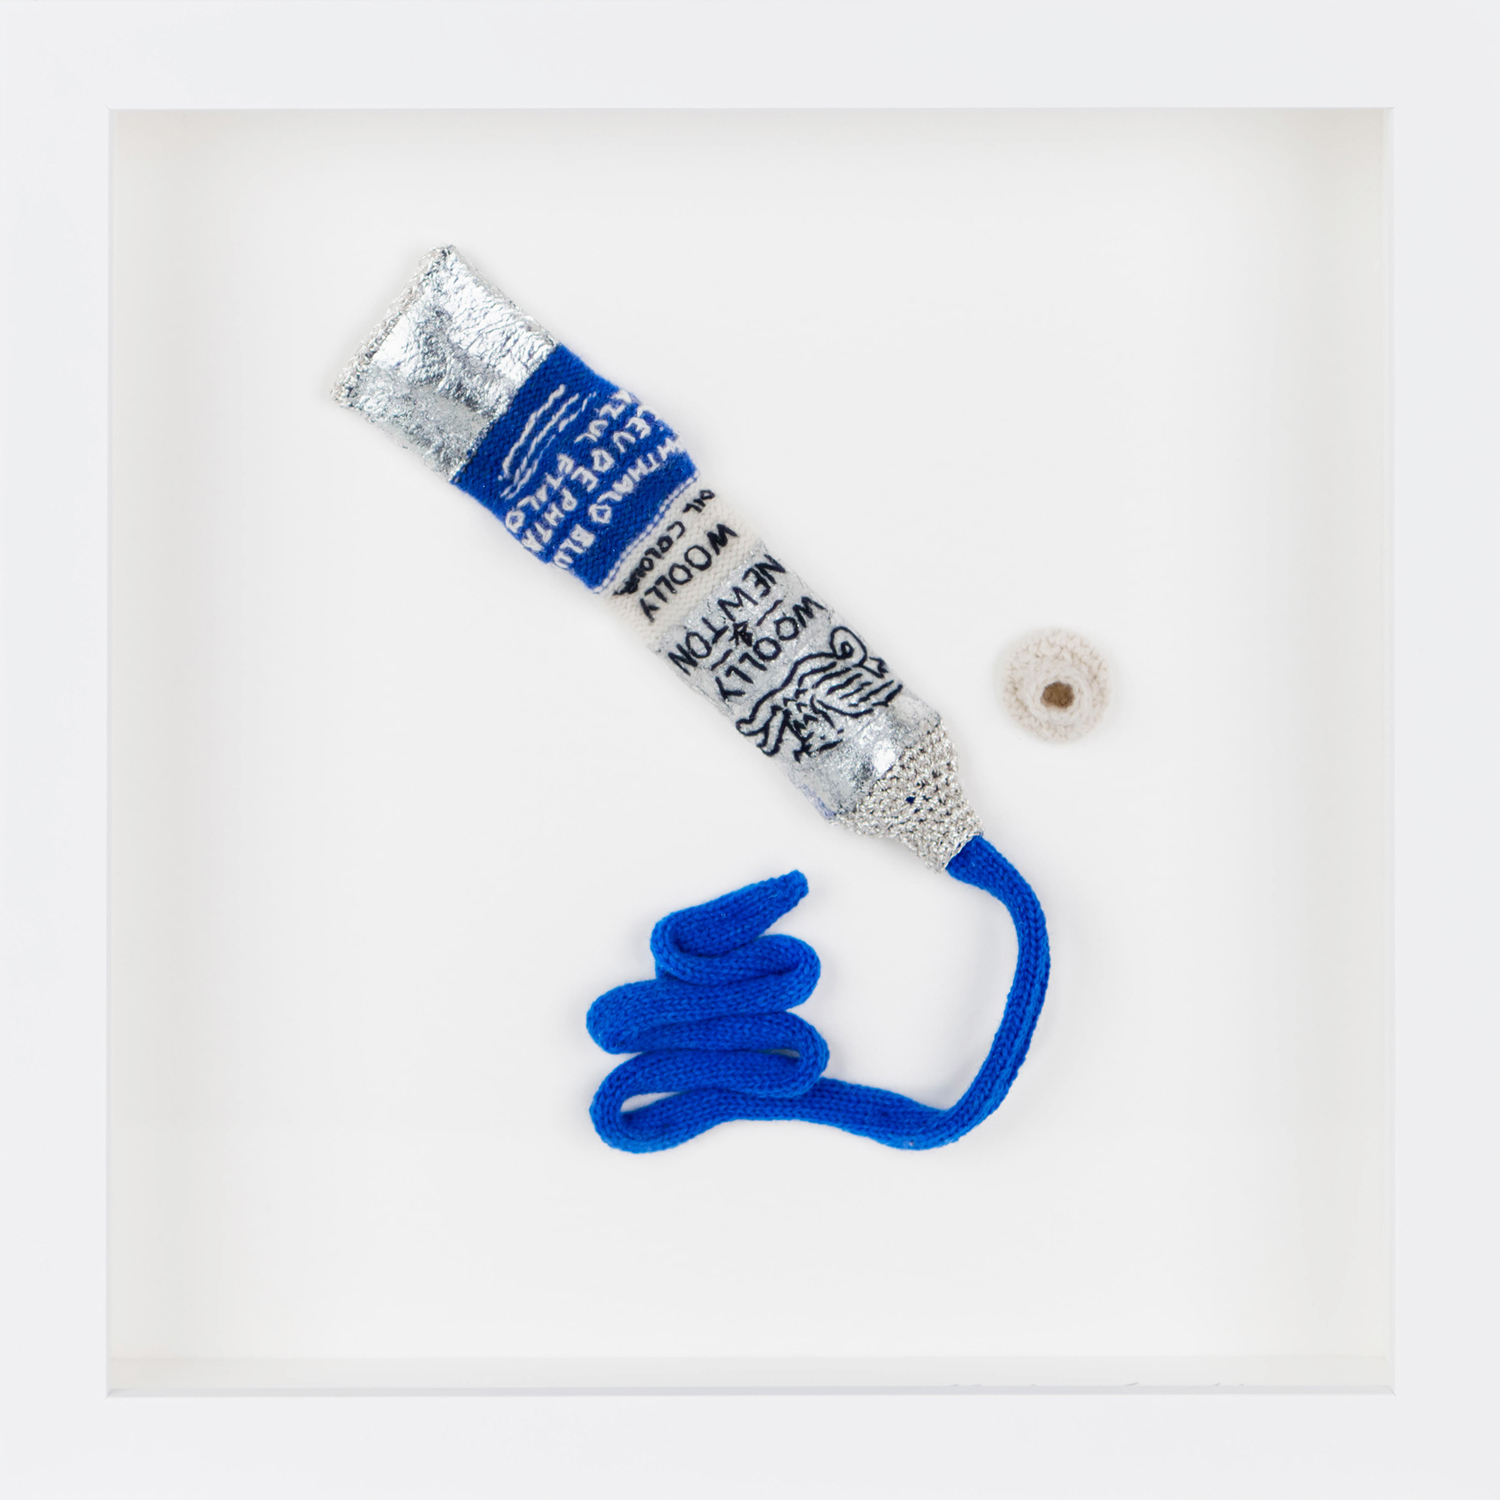 ‘Woolly & Newton’ Kate Jenkins limited edition knitted paint tube – Phthalo Blue